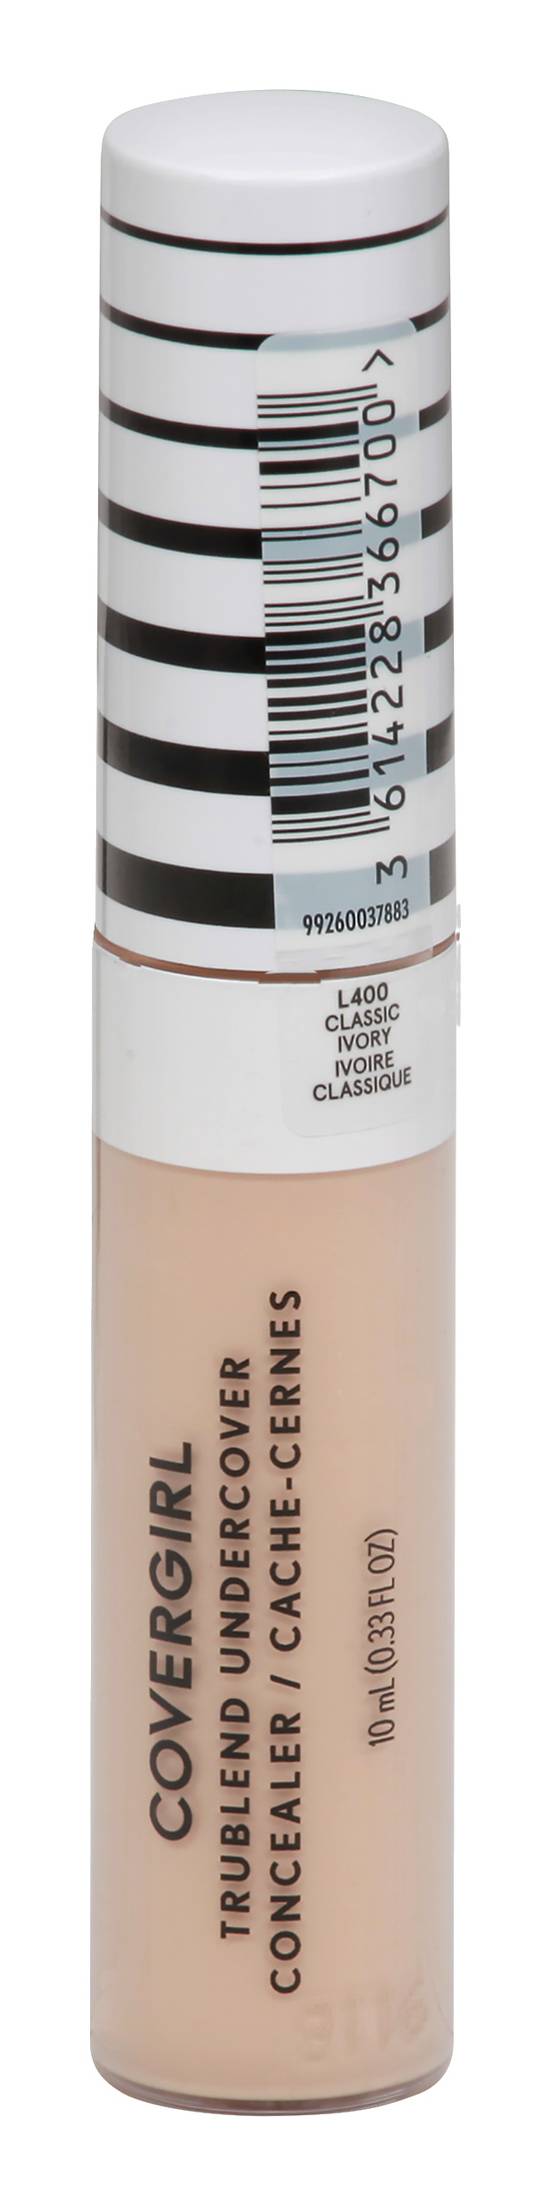 Covergirl Trublend Undercover L400 Classic Ivory Concealer